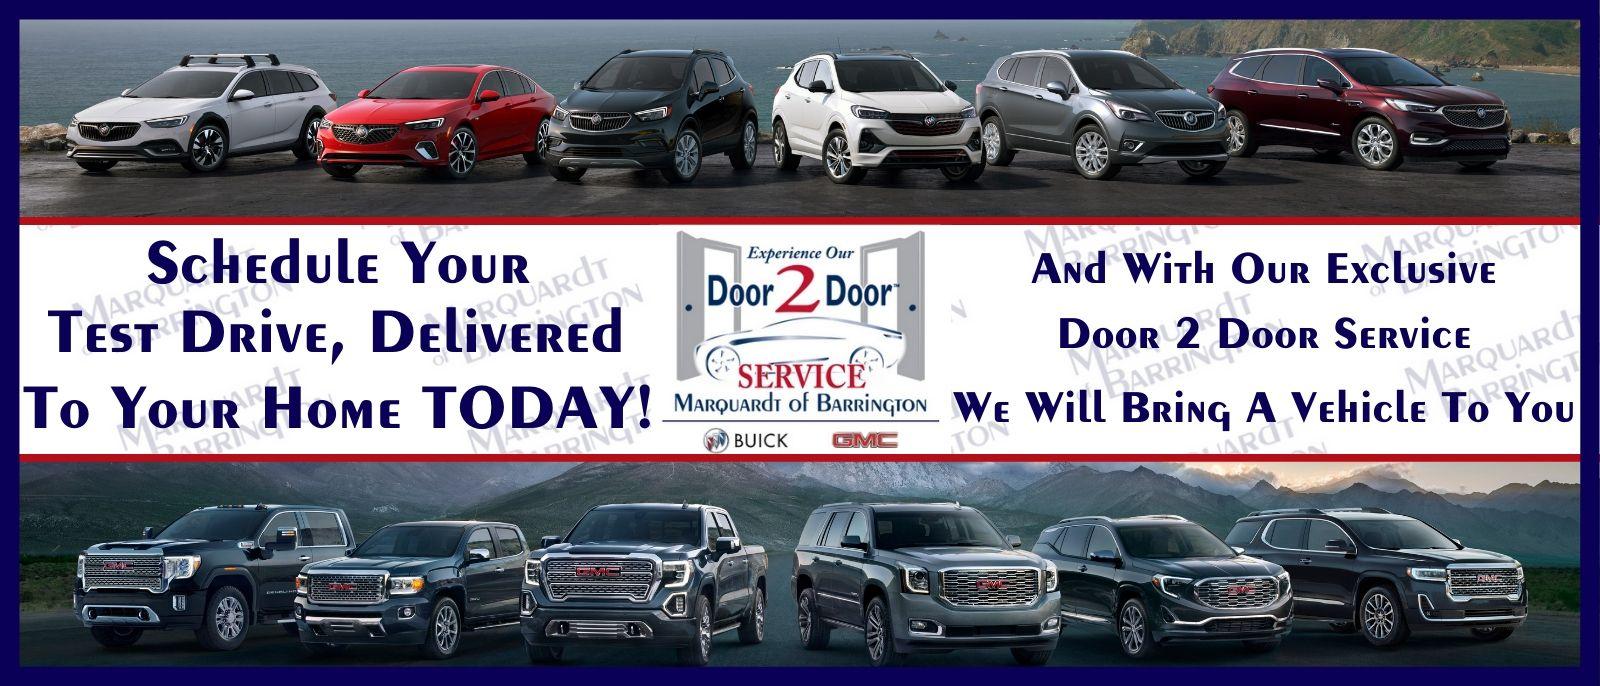 Schedule A Vehicle To Be Delivered To Your Home NOW